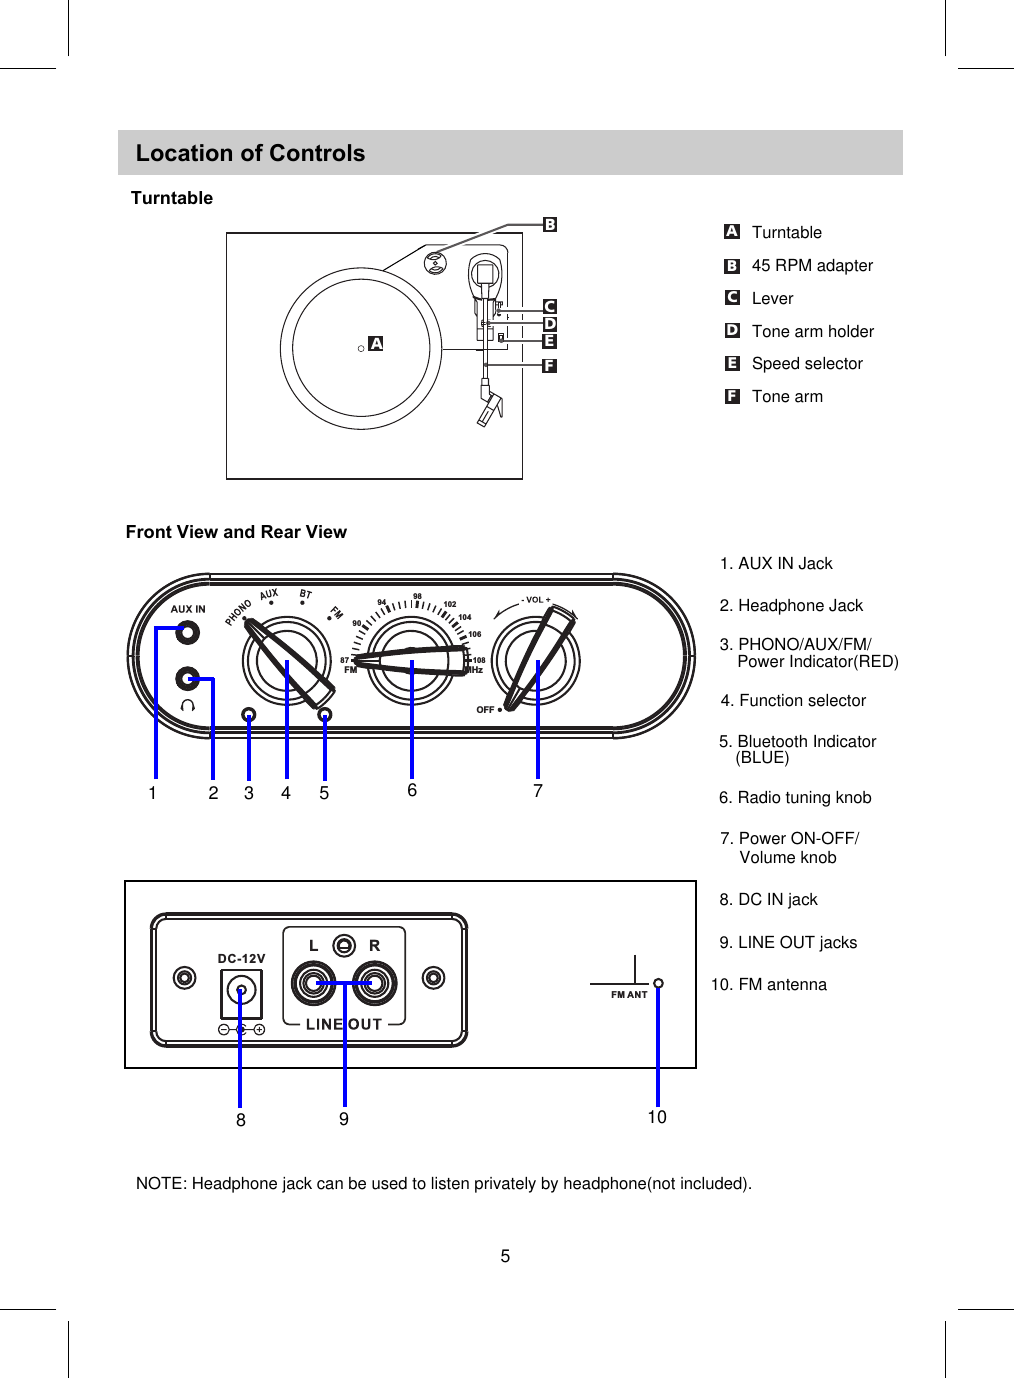 OFFFM MHz87909498102106108104Location of Controls1 2 3 489FEDADBCBA10. FM antenna9. LINE OUT jacks8. DC IN jack1. AUX IN Jack4. Function selector6. Radio tuning knobCEF5TurntableTurntable45 RPM adapterLeverTone arm holderSpeed selectorTone armFront View and Rear View7. Power ON-OFF/Volume knob672. Headphone Jack3. PHONO/AUX/FM/ Power Indicator(RED)DC-12VL RFM ANT10NOTE: Headphone jack can be used to listen privately by headphone(not included).5. Bluetooth Indicator(BLUE)5